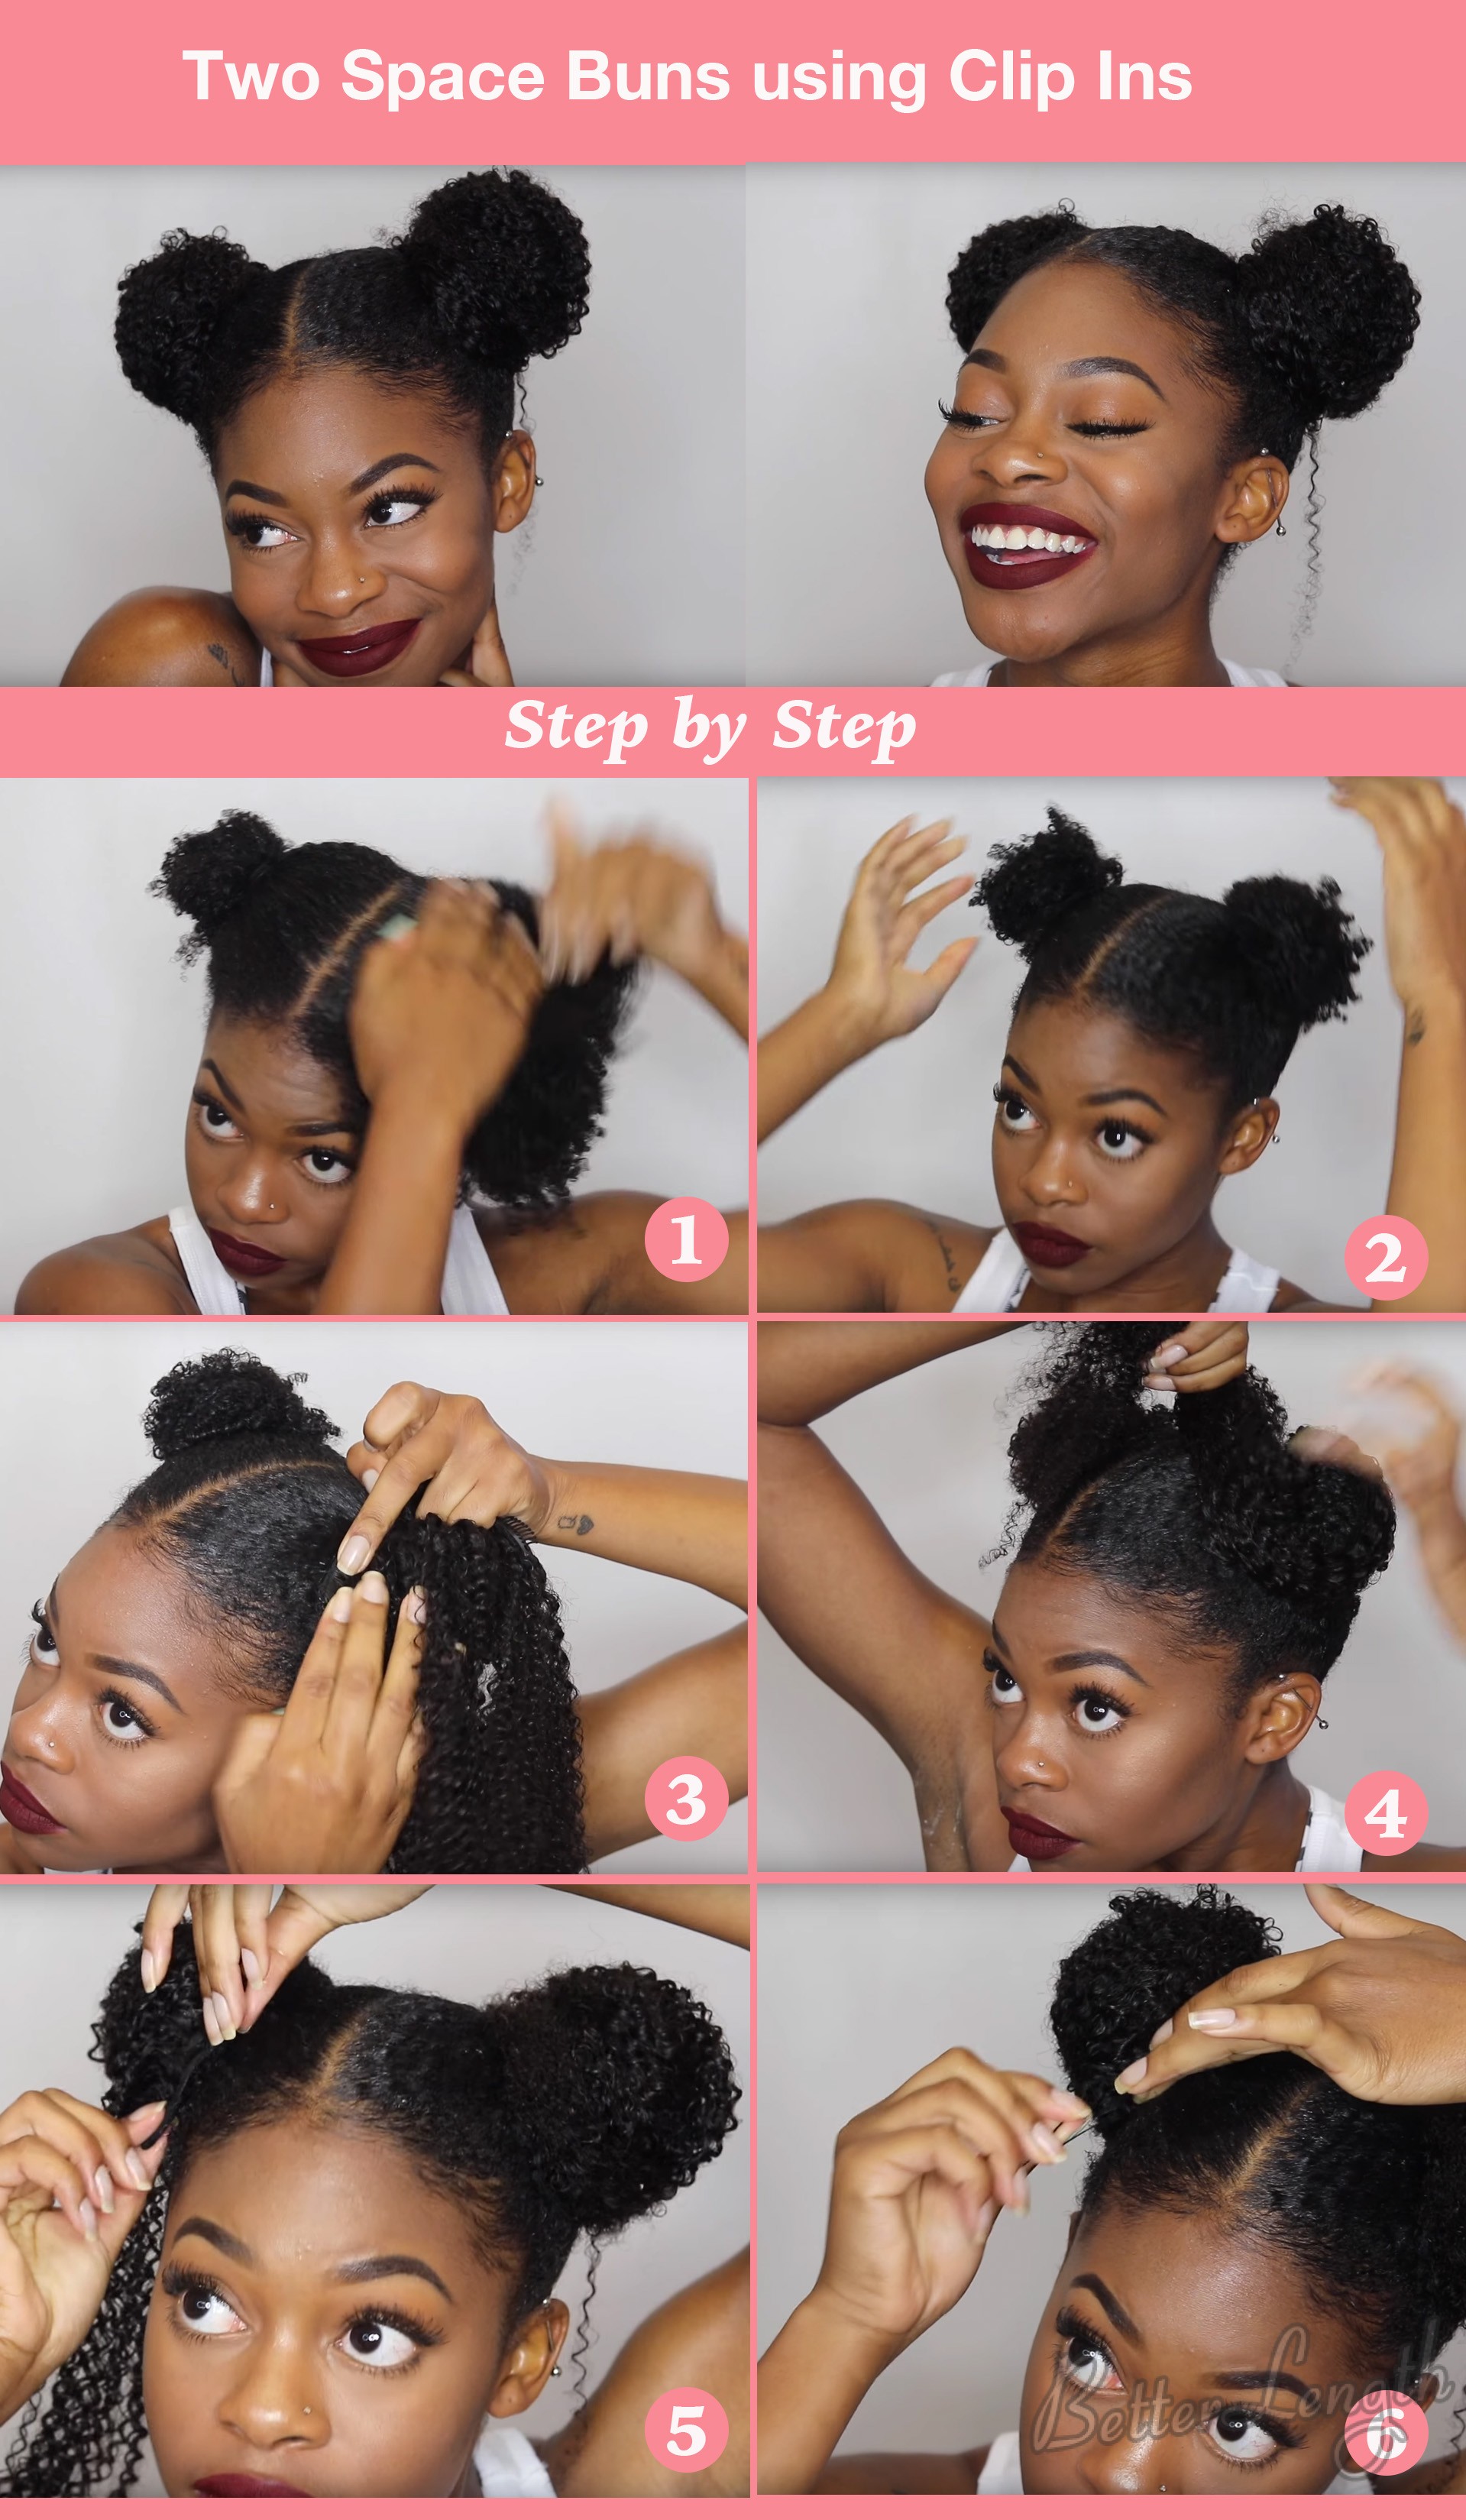 40 Most Inspiring Natural Hairstyles for Short Hair